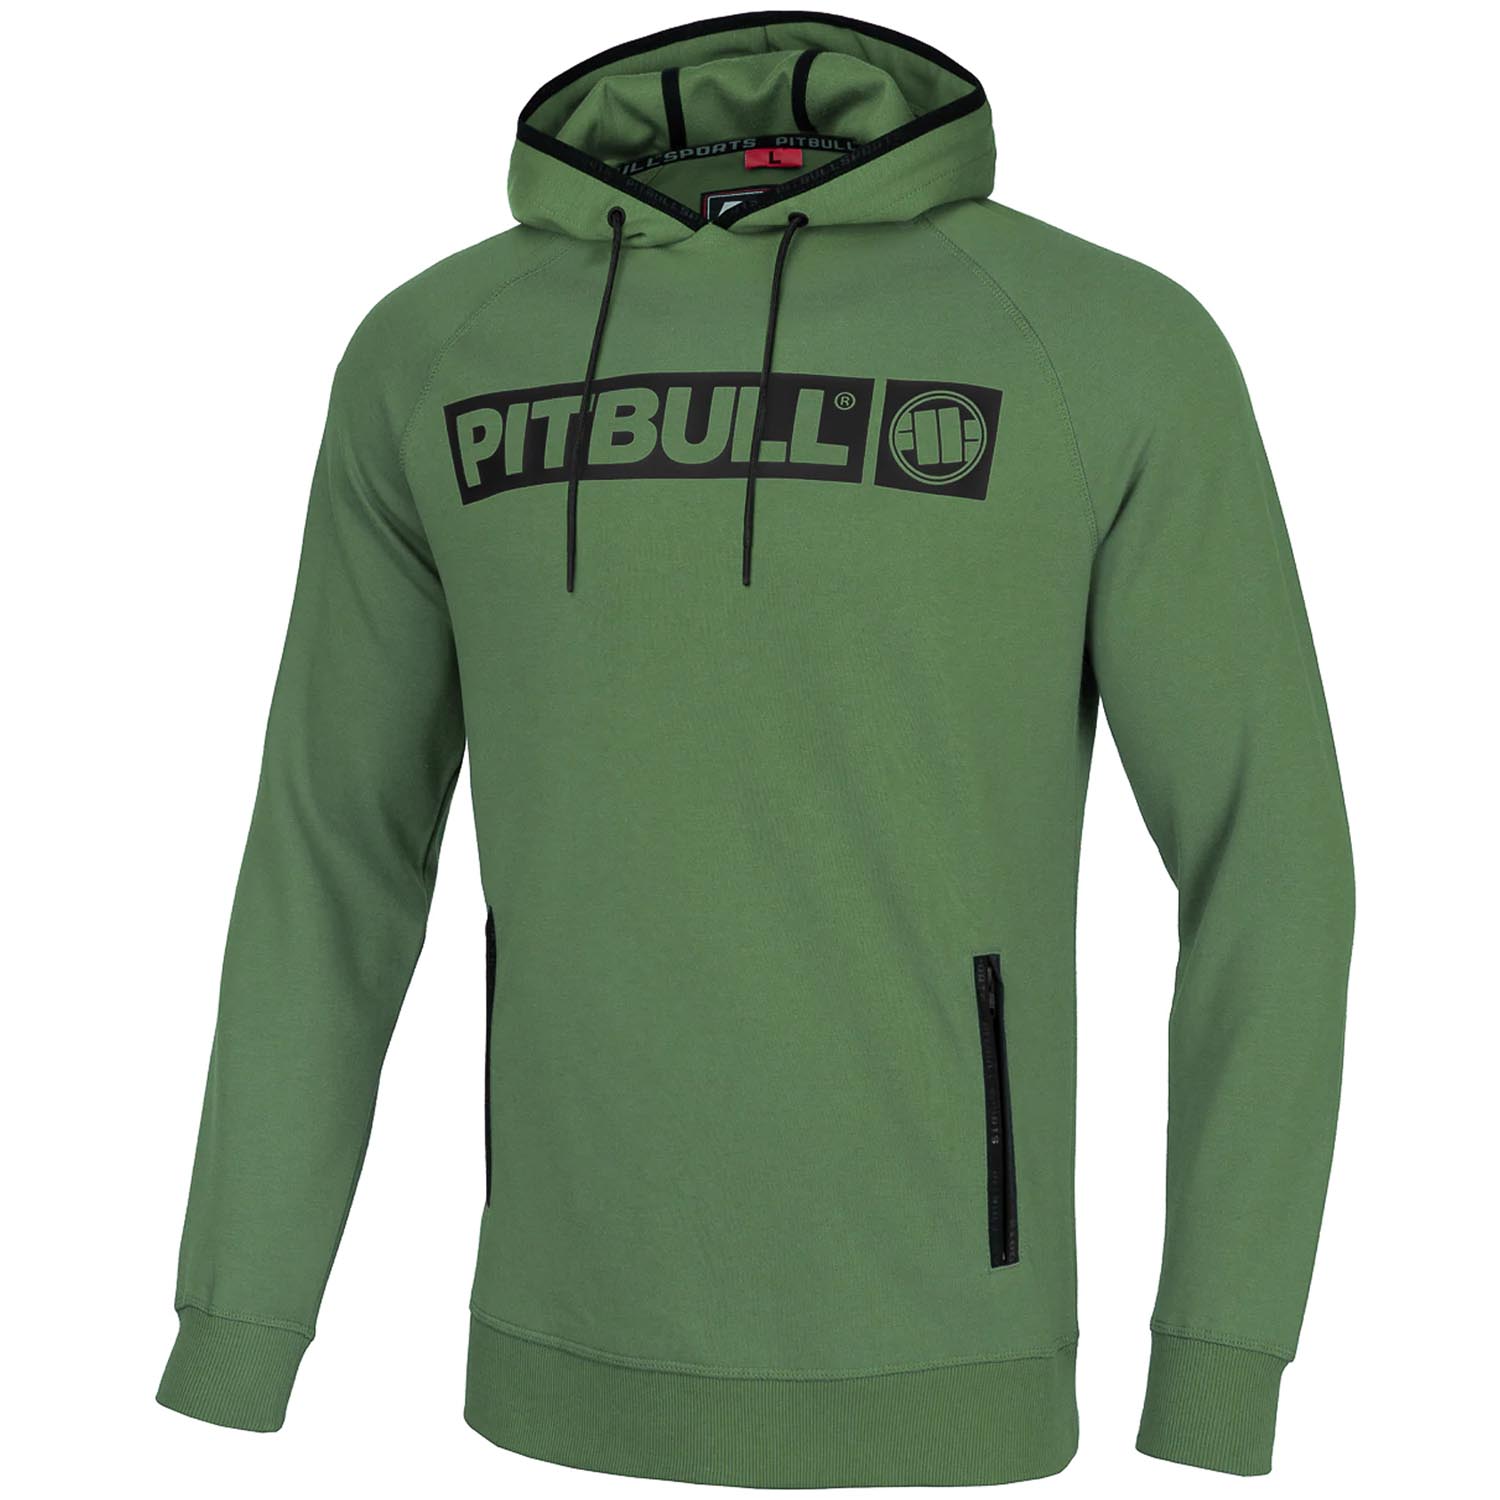 Pit Bull West Coast Hoody, Falcon Hilltop, olive